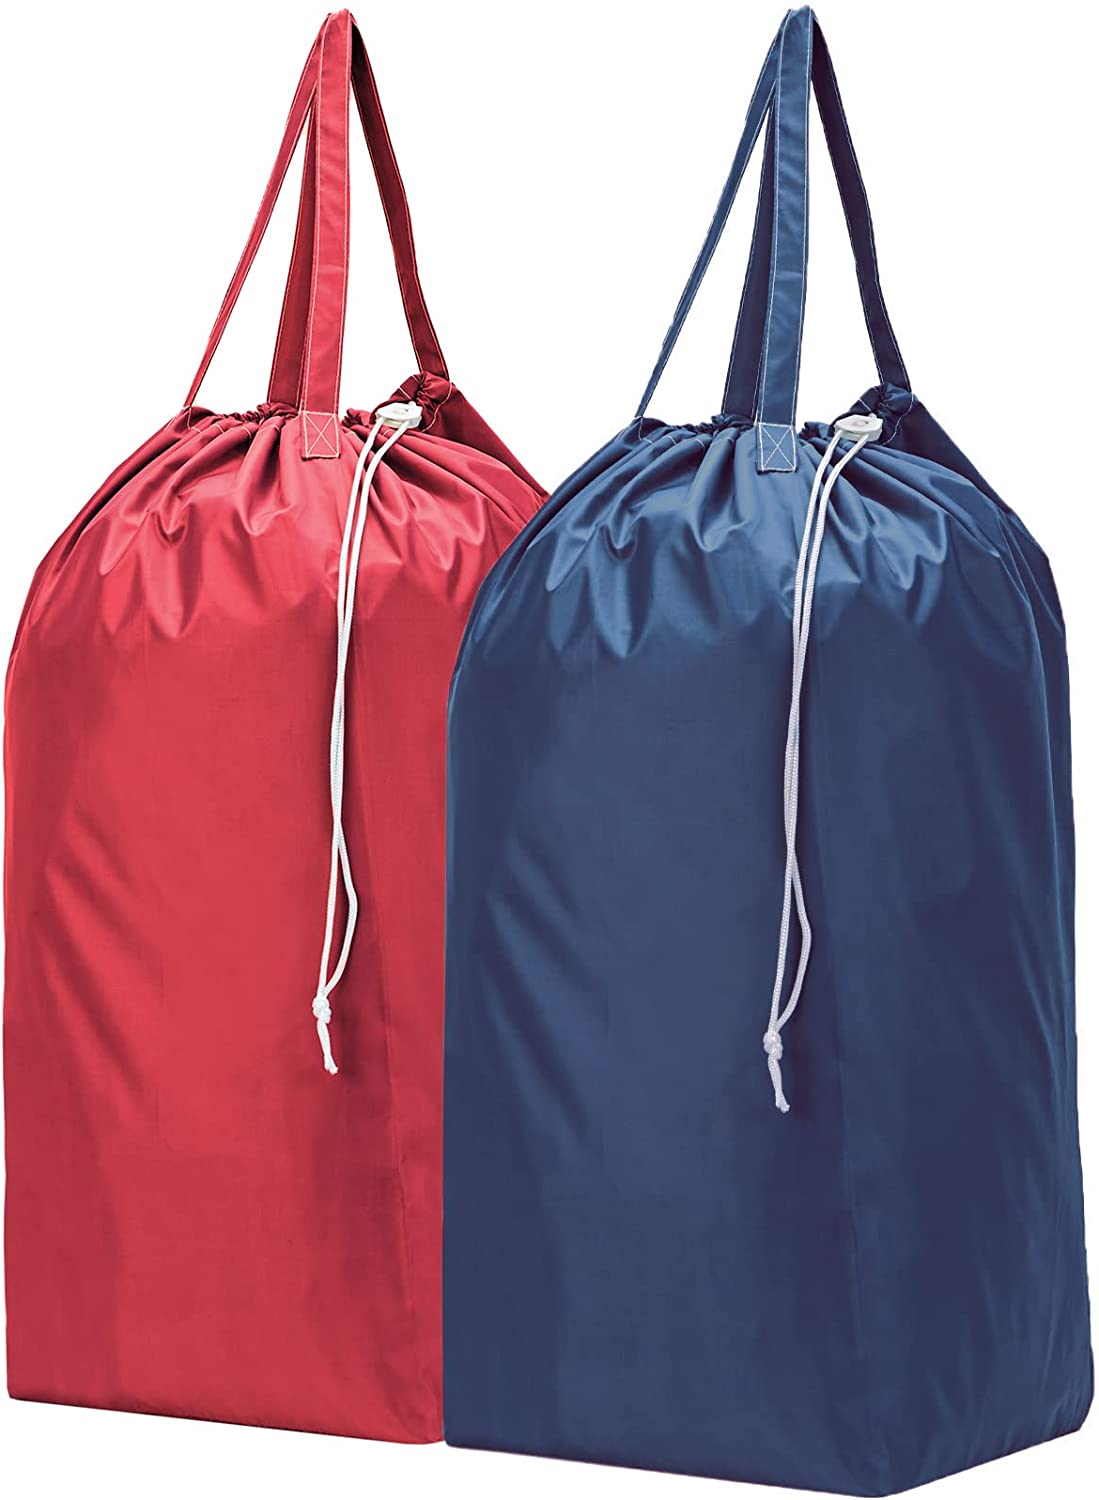 HOMEST Ultra Large Ripstop Laundry Bags, 2-Pack